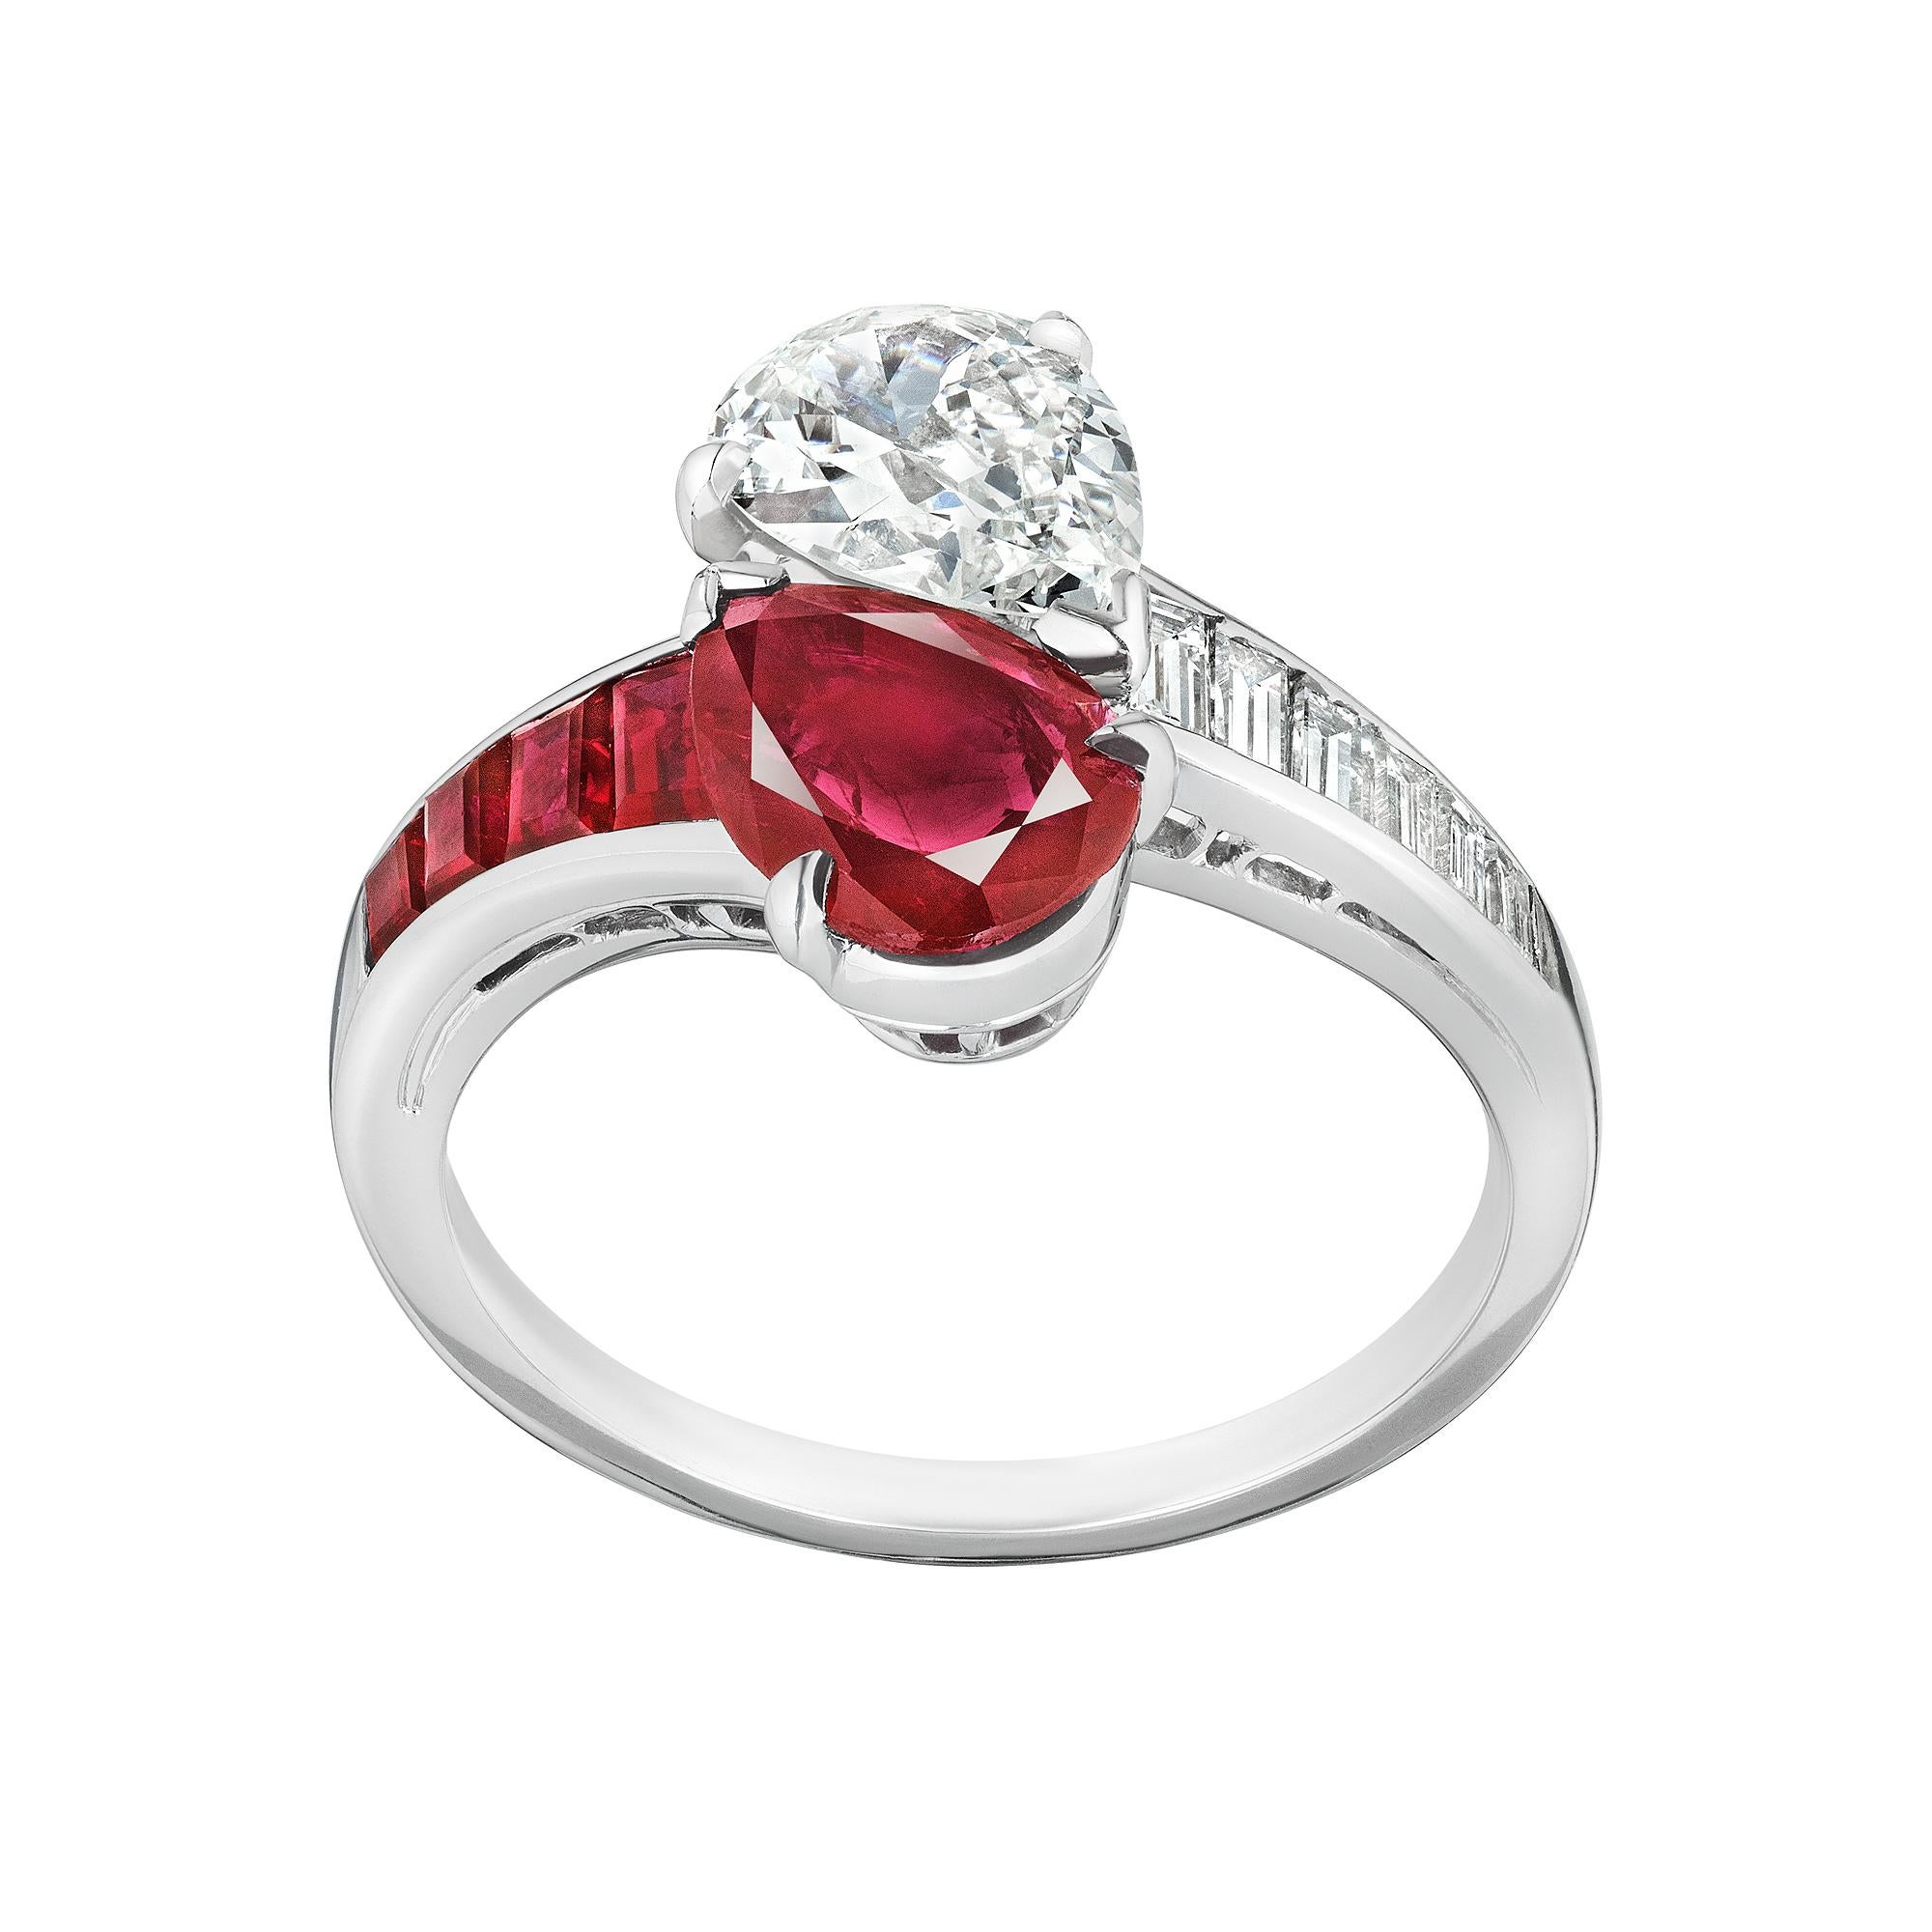 Symbolizing the commitment of you and me, translated to French as 'Toi et Moi', this Oscar Heyman vintage ruby and diamond bypass ring is timelessly romantic.  With a .95 carat pear shape natural Burmese AGL certified luscious ruby happily snuggling